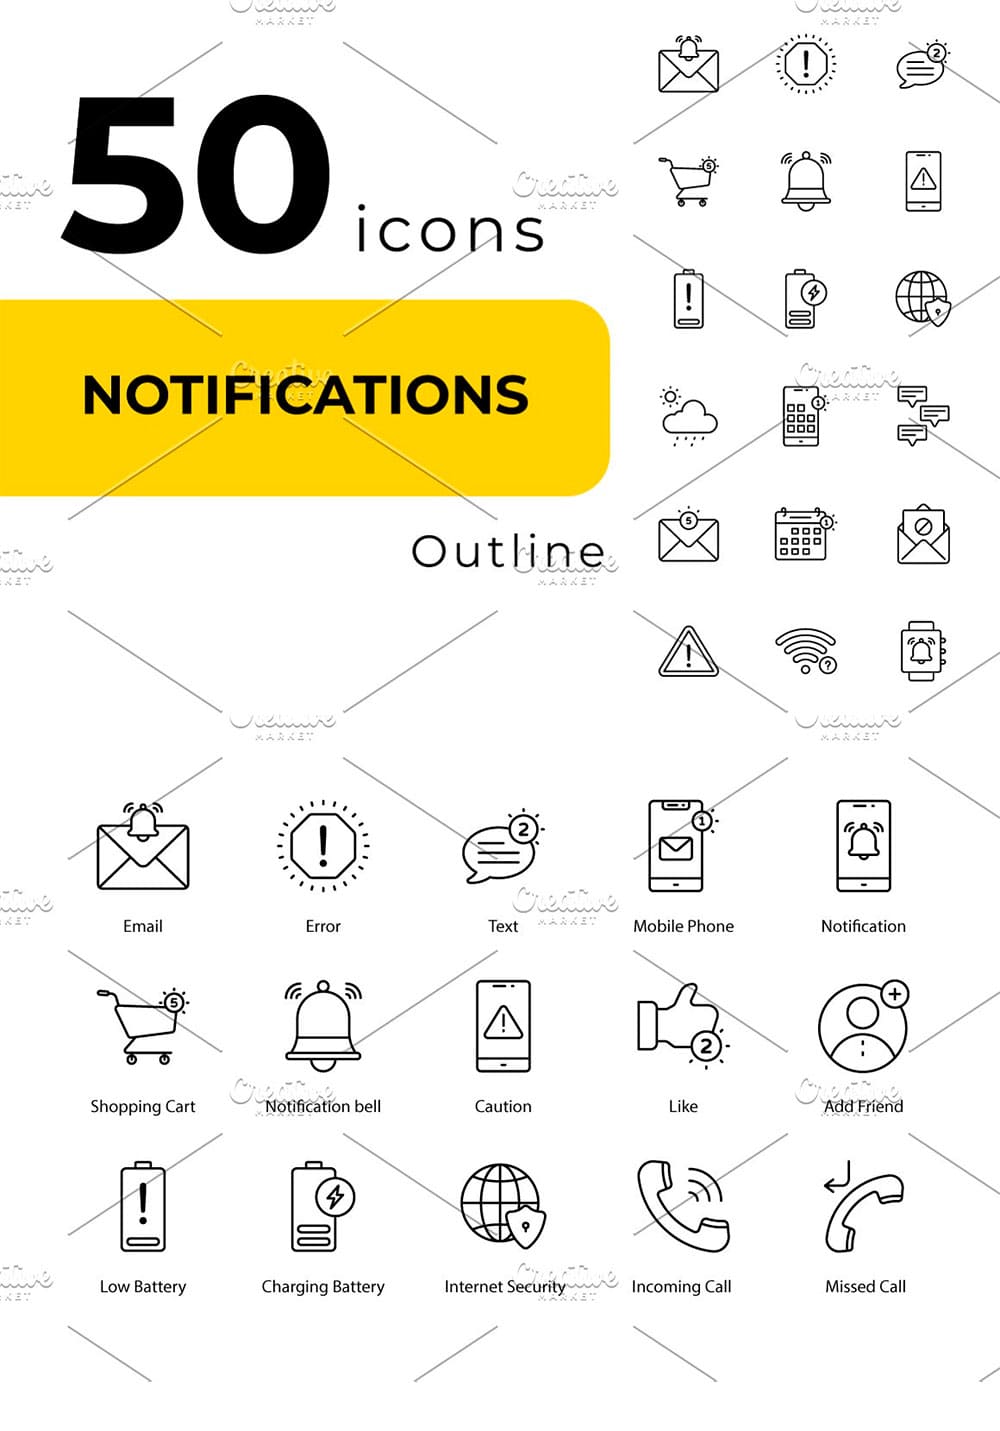 Notifications icons, picture for pinterest.